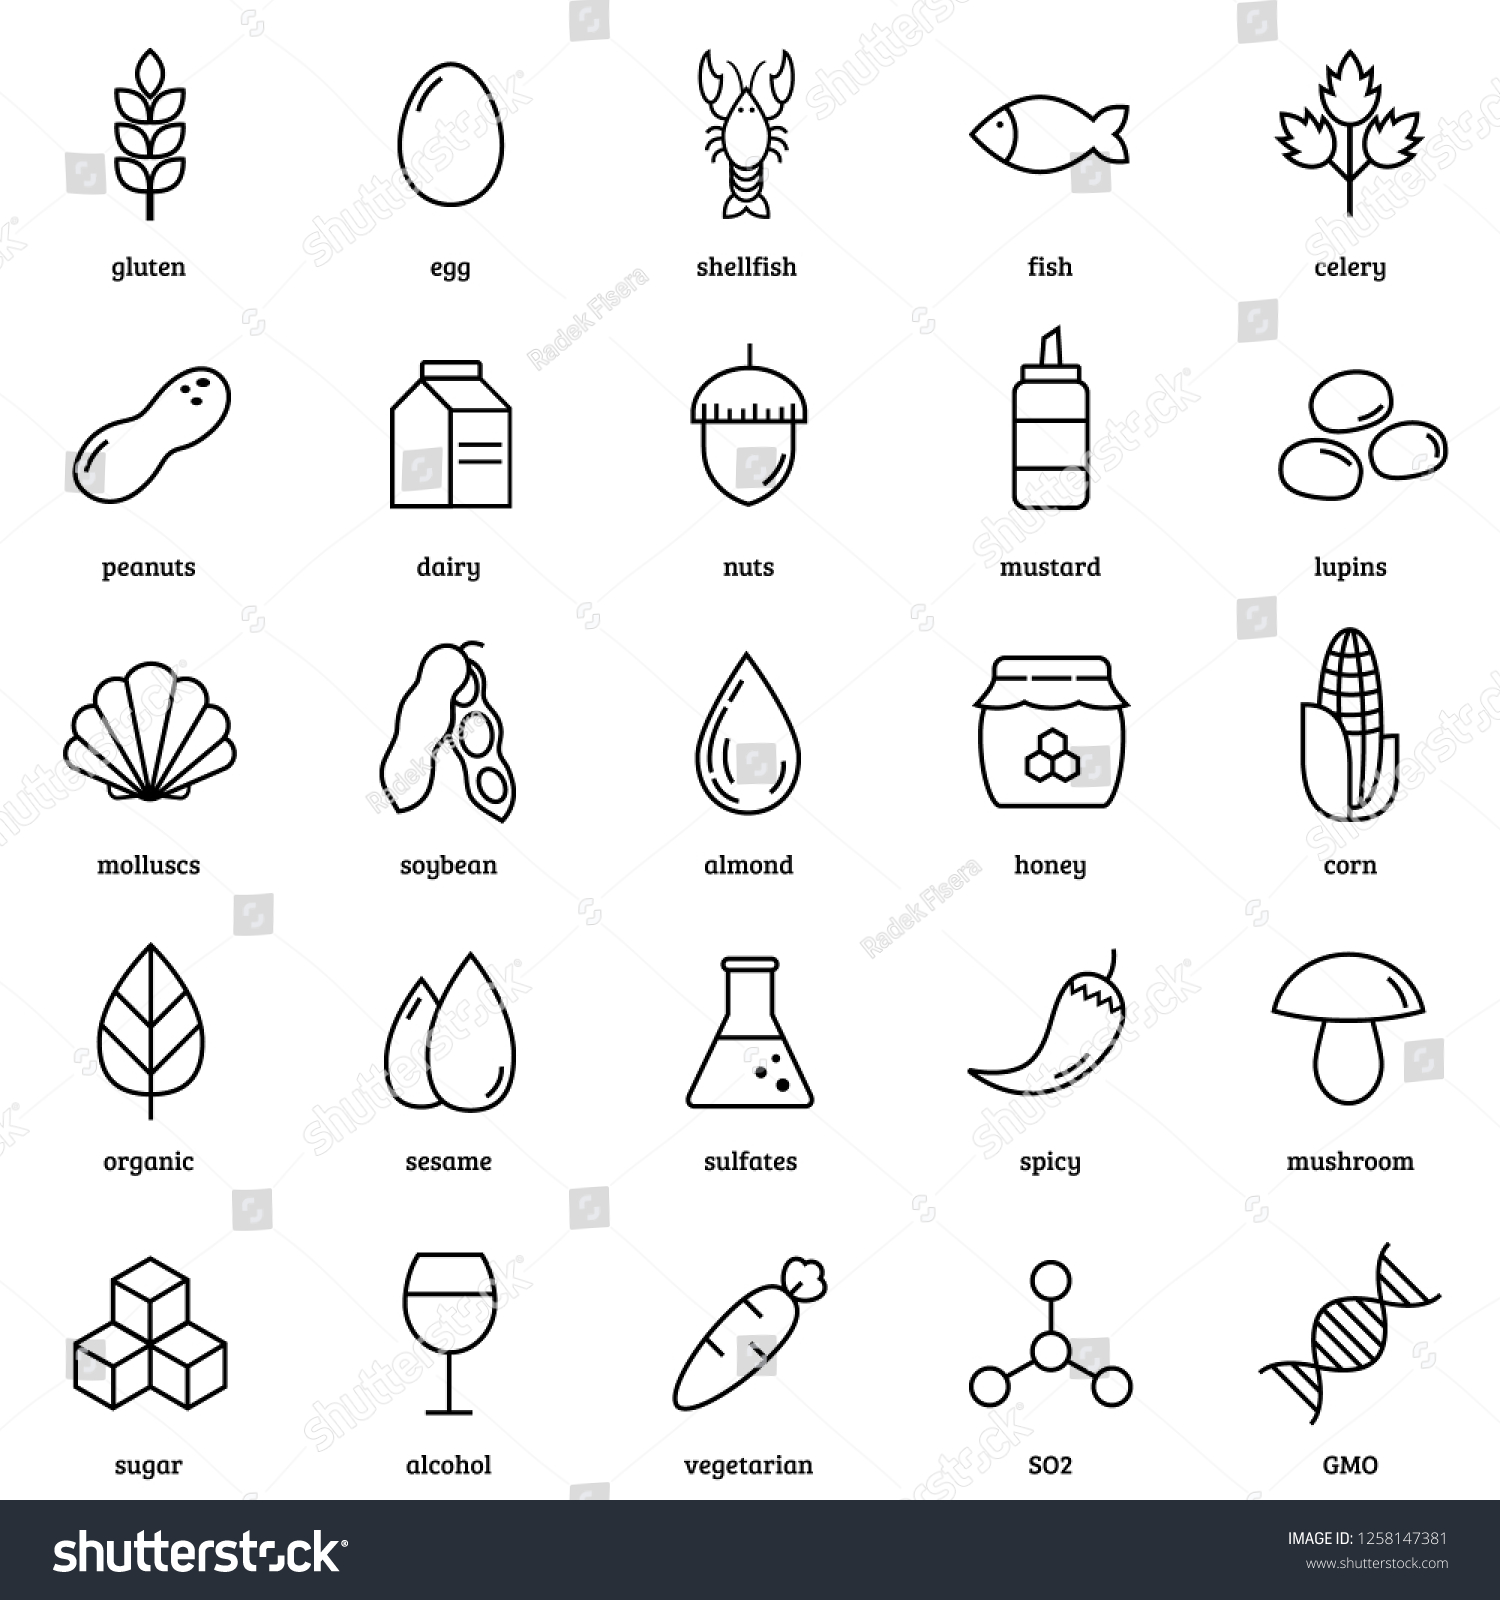 SVG of Allergen line icons vector set. Isolated on white background. svg